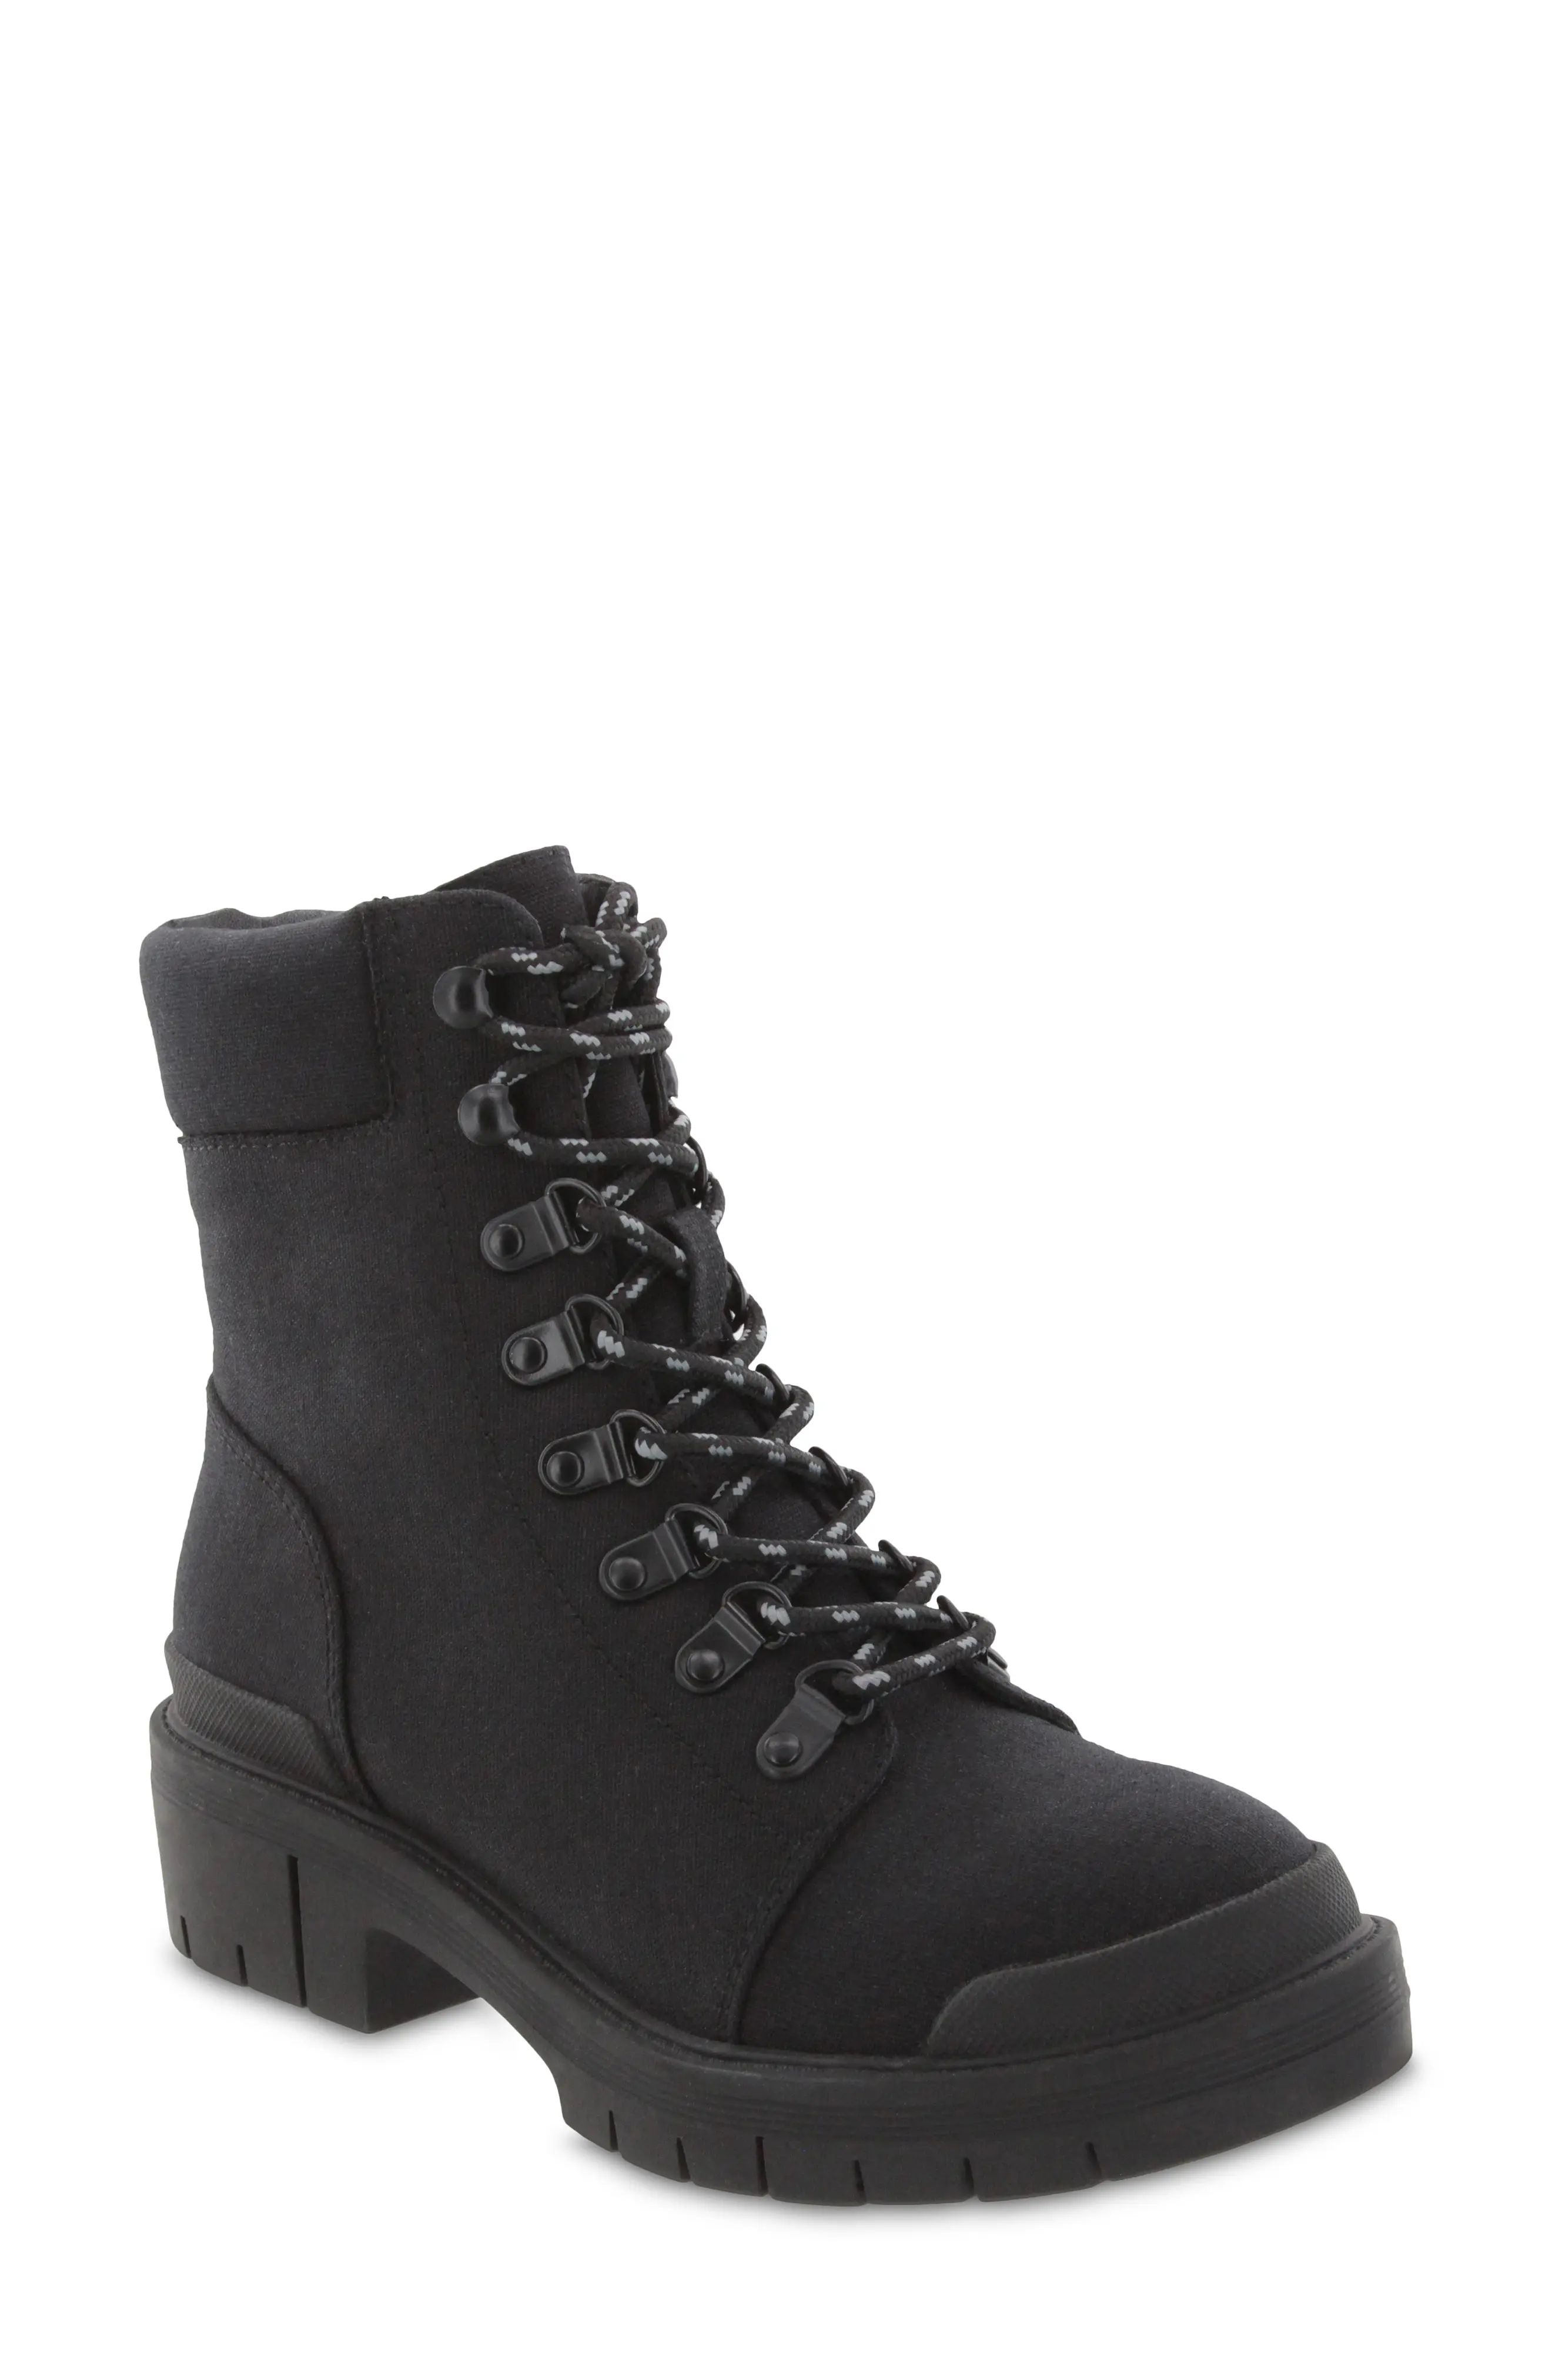 MIA WYN Combat Boot in Black Canva at Nordstrom, Size 6 | Nordstrom